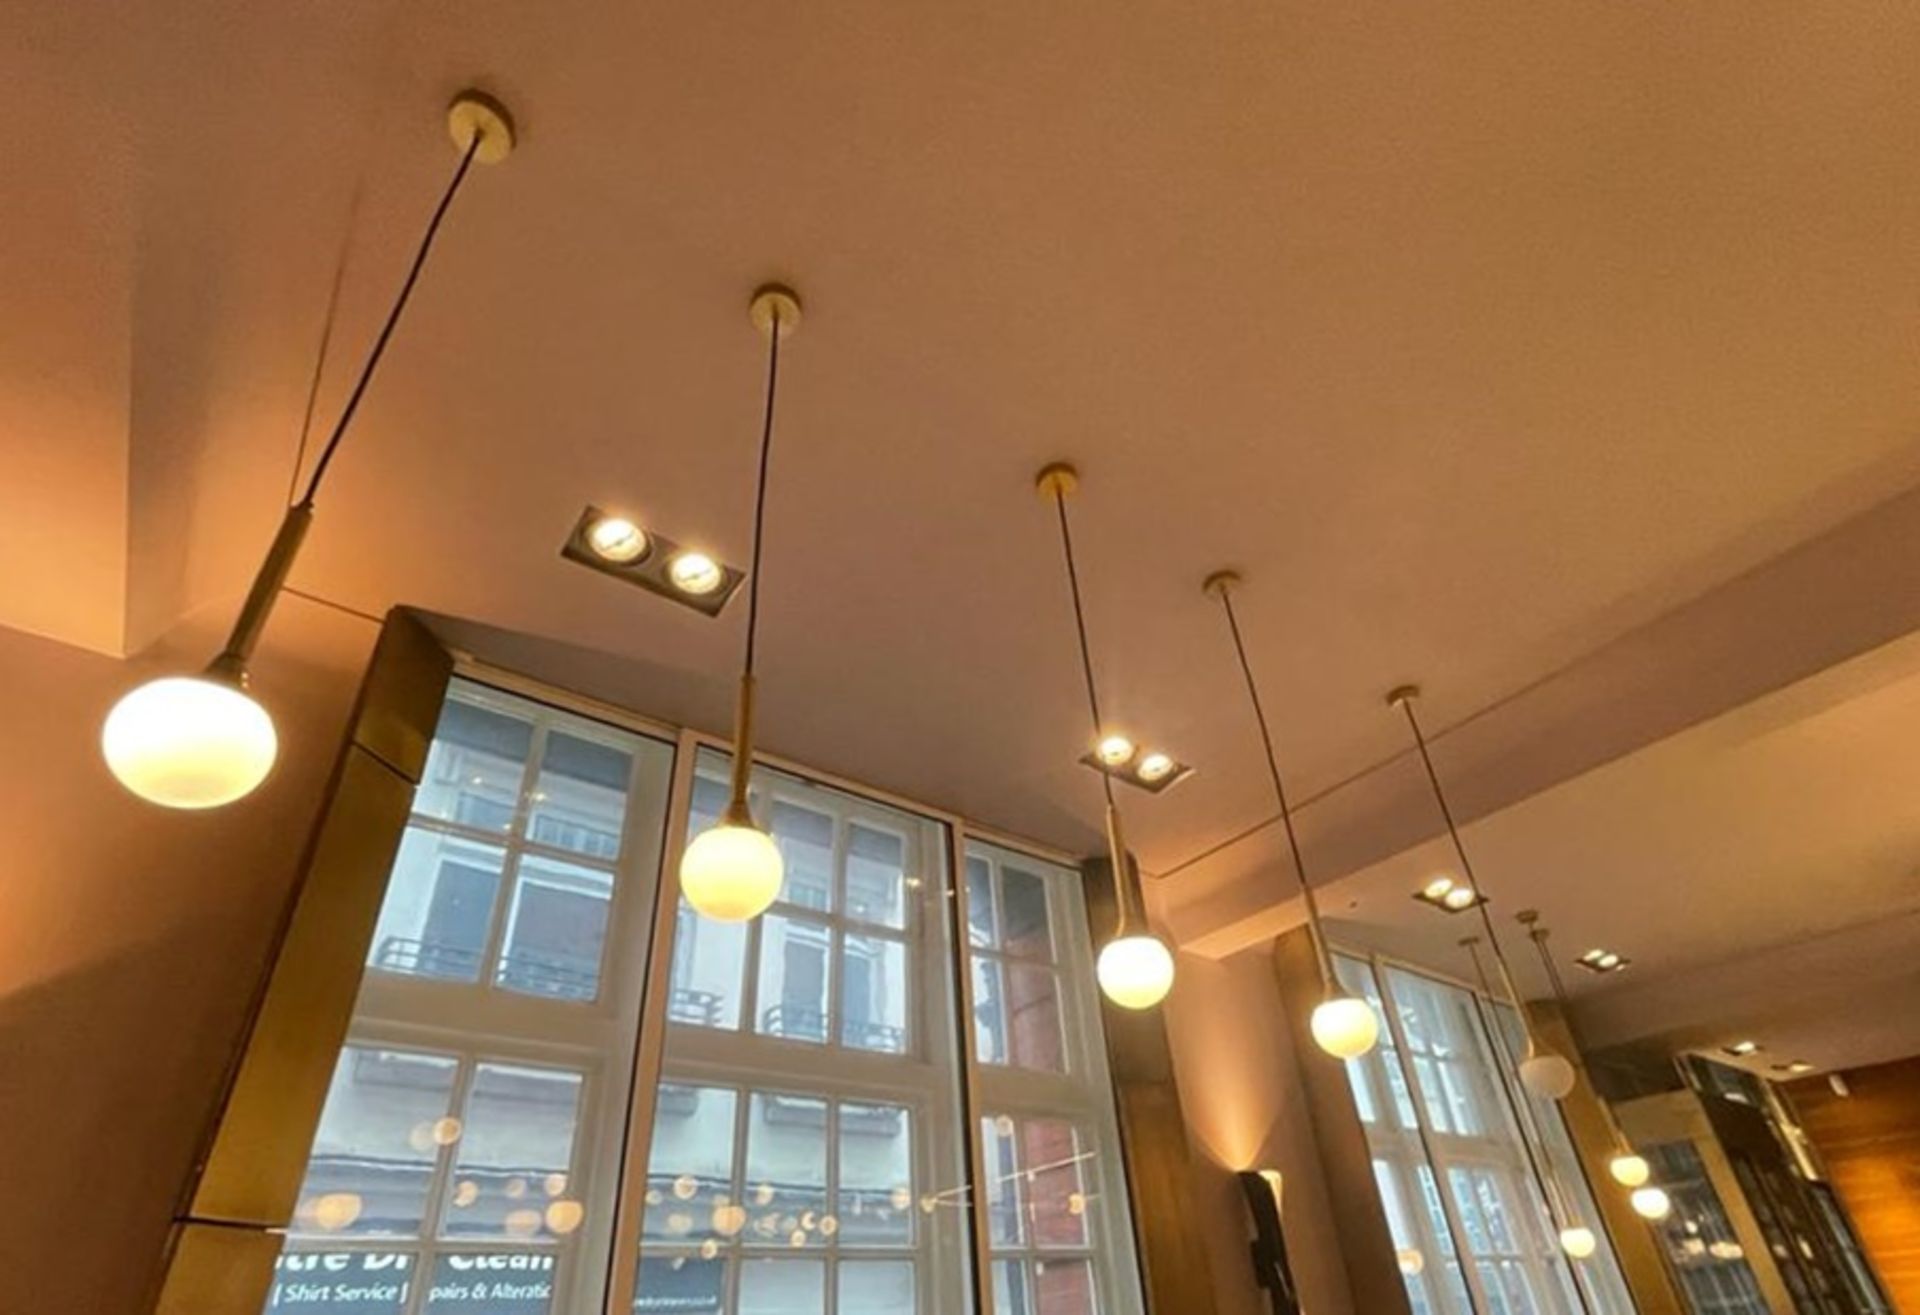 4 x Hand Made 'Petite' Suspension LED Ceiling Lights By Delight Lighting - Image 4 of 10